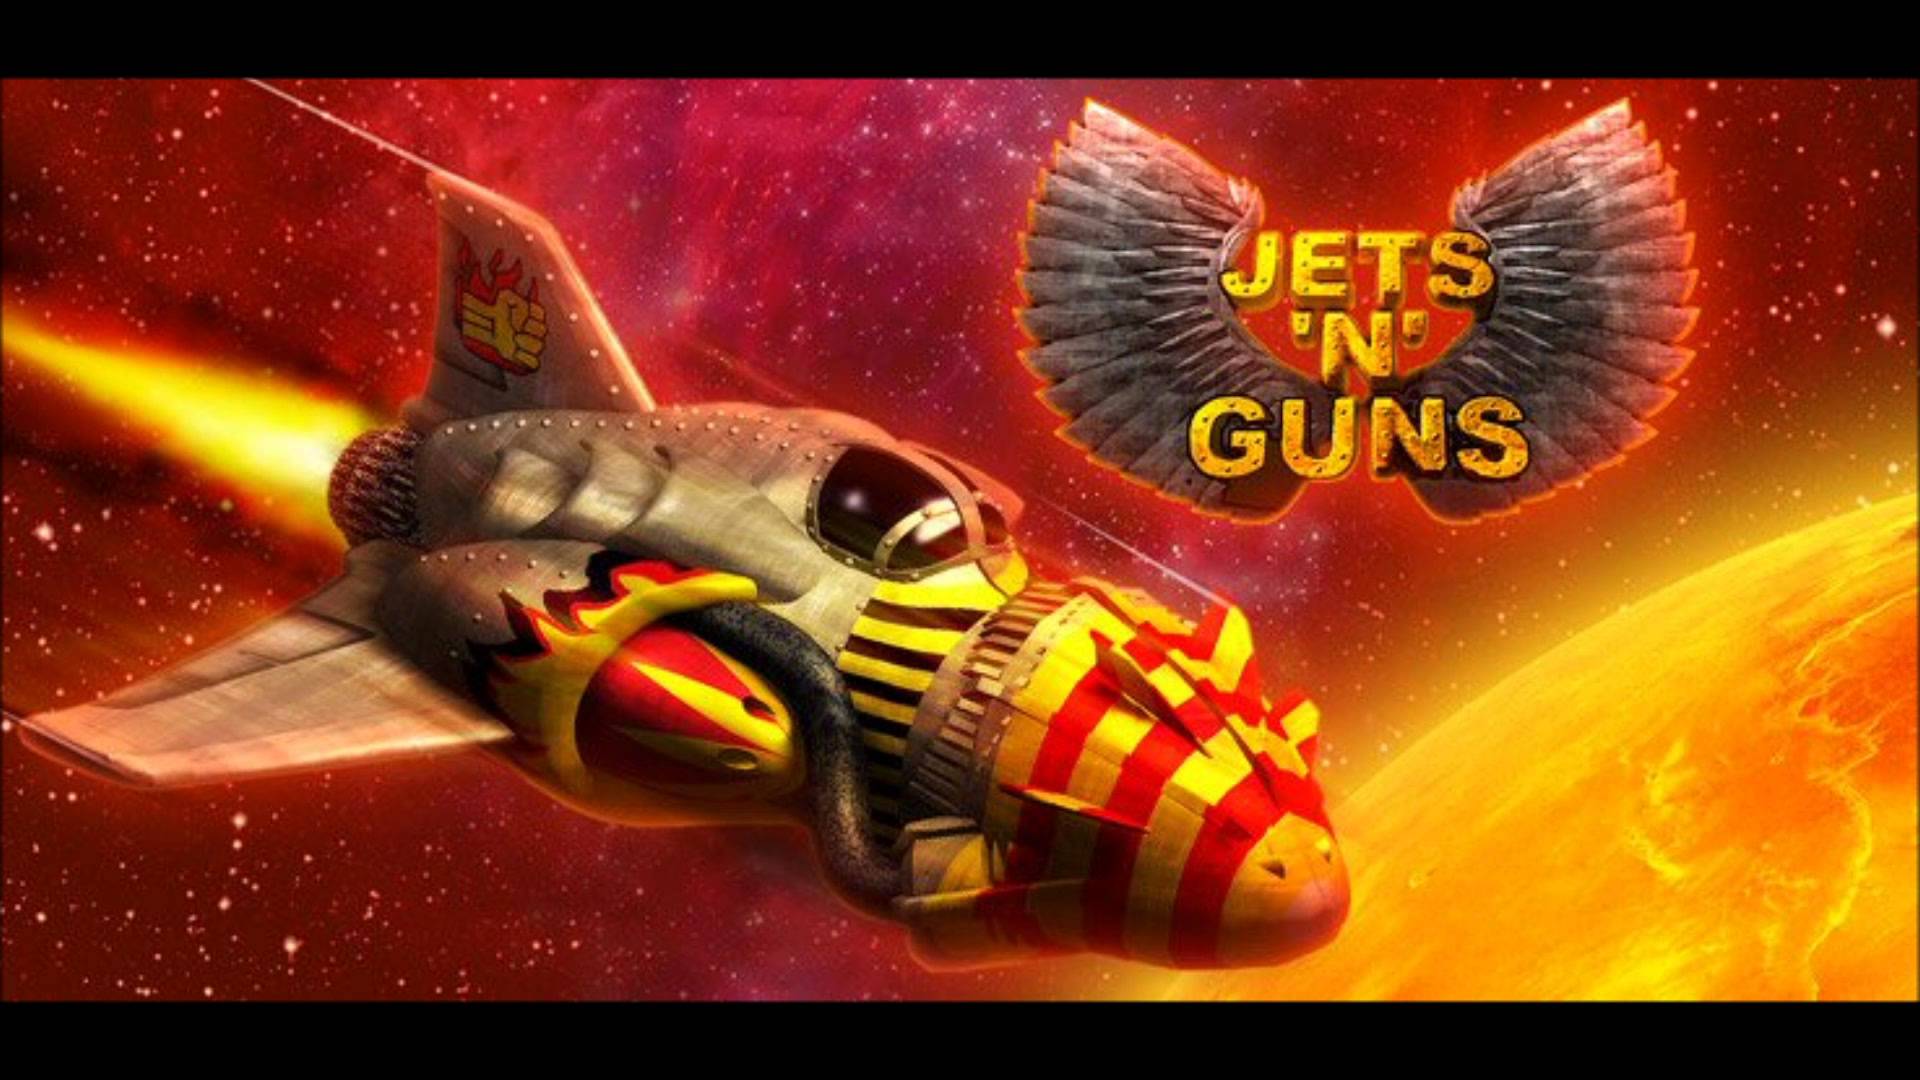 Jets'n'Guns Gold Pics, Video Game Collection